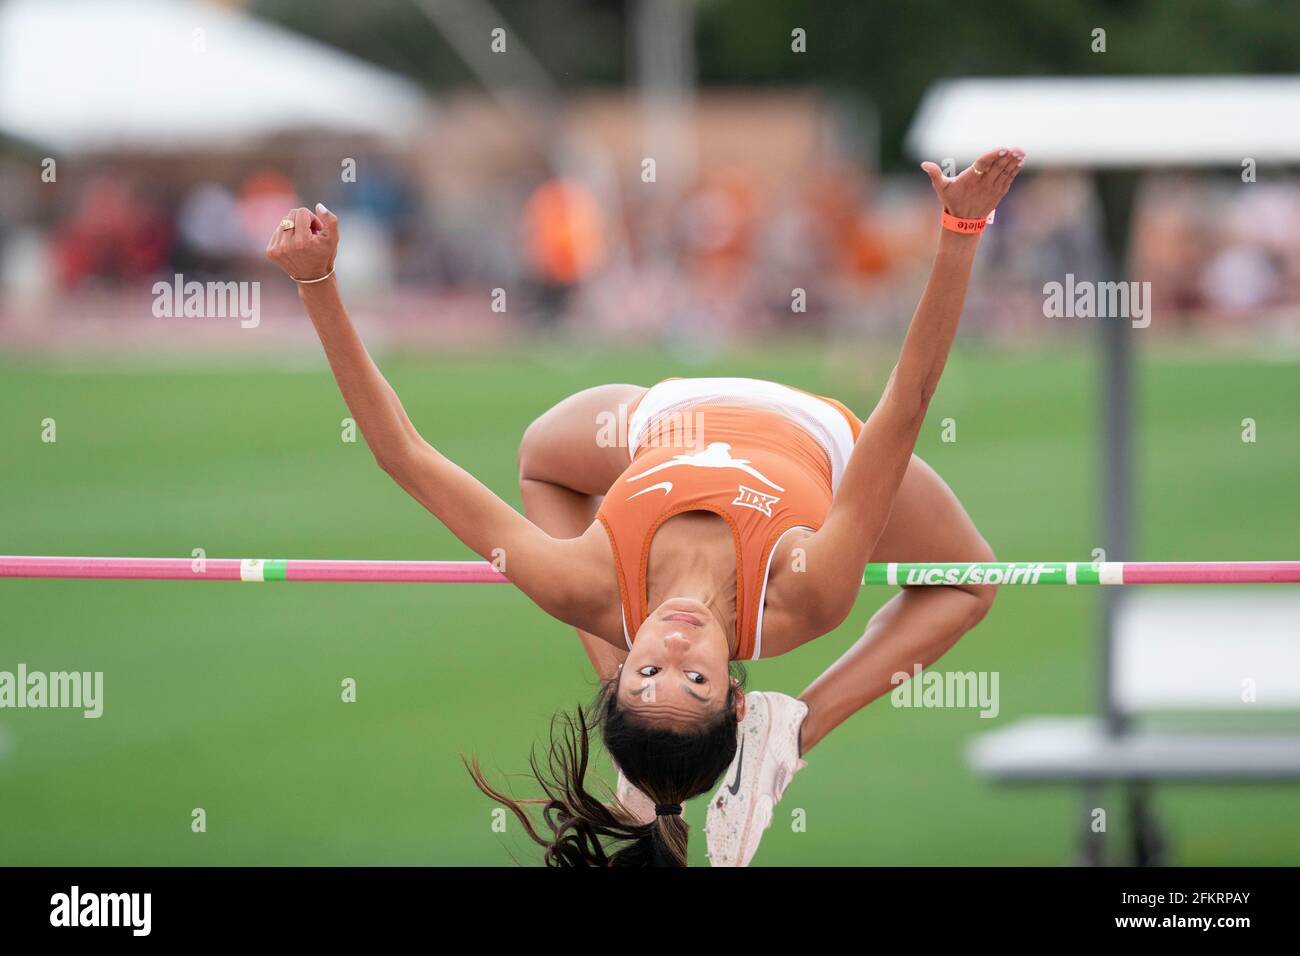 Austin, Texas, USA. 01st May, 2021: Elite college athlete Marleen Guerrero of Texas competing in the women's high jump at the Texas Invitational at Mike A. Myers Stadium at the University of Texas at Austin. Credit: Bob Daemmrich/Alamy Live News Stock Photo